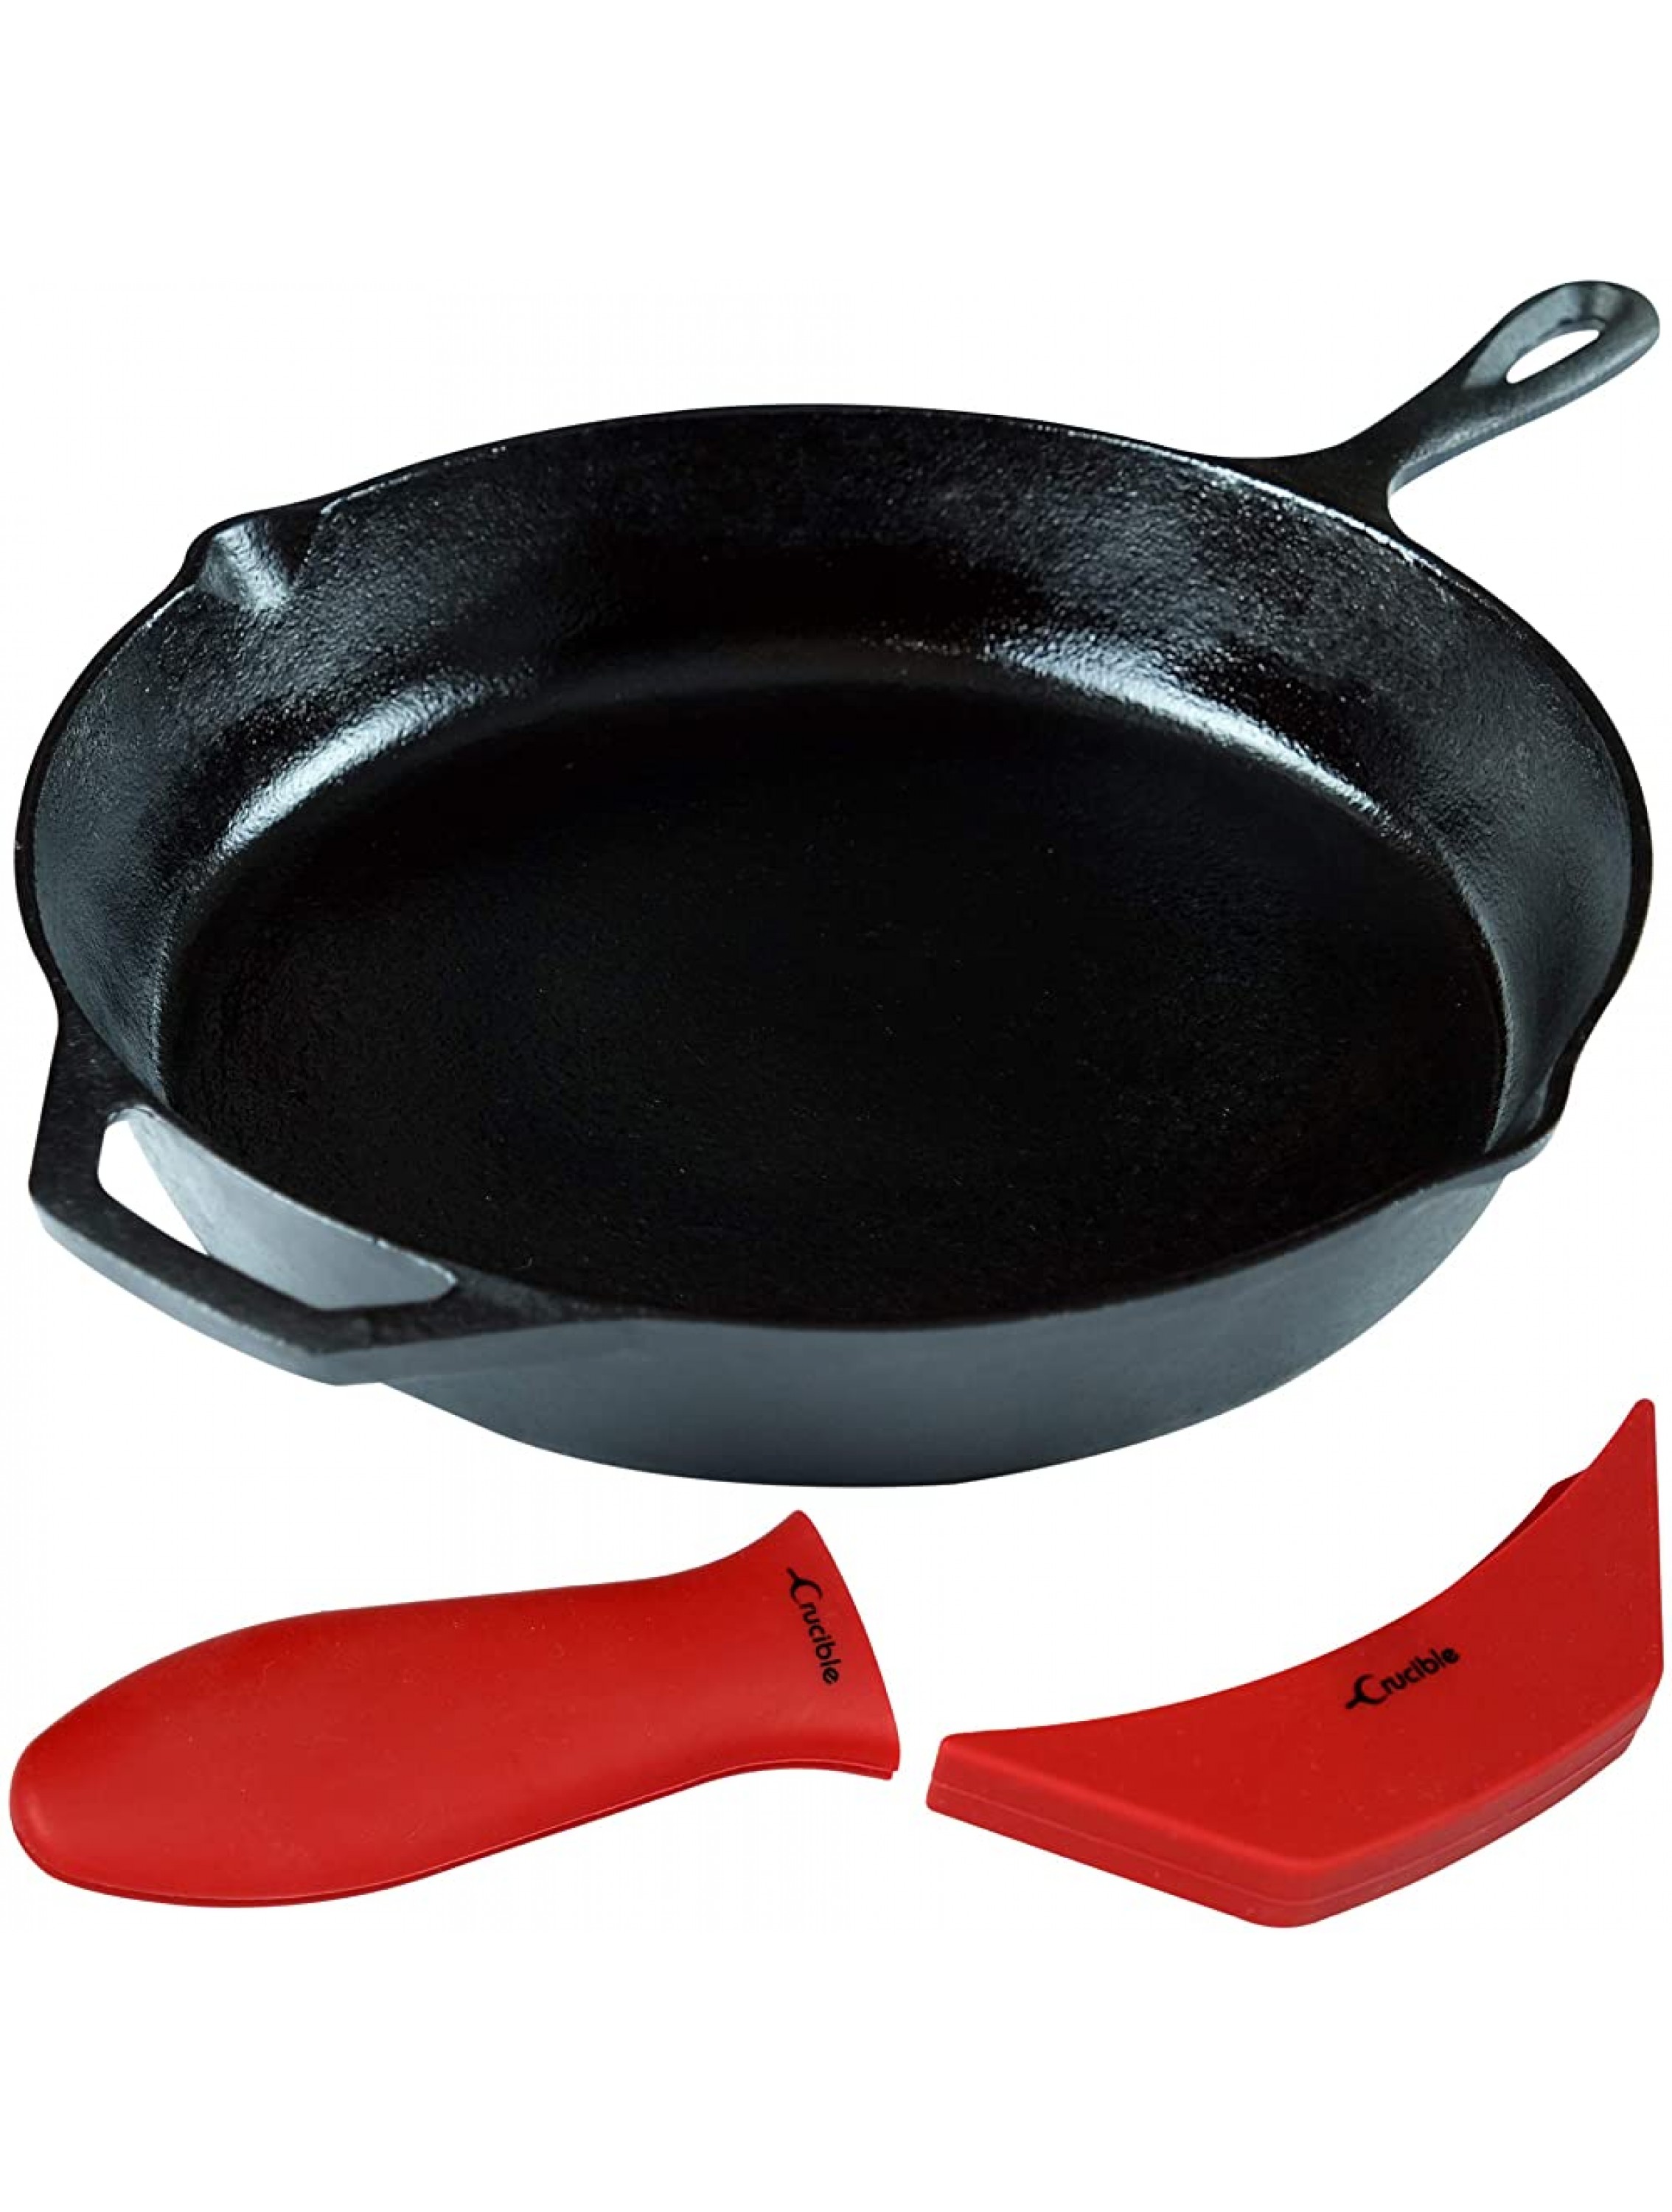 12-Inch Cast Iron Skillet Set Pre-Seasoned Including Large & Assist Silicone Hot Handle Holders | Indoor & Outdoor Use - BWSWEMKNI